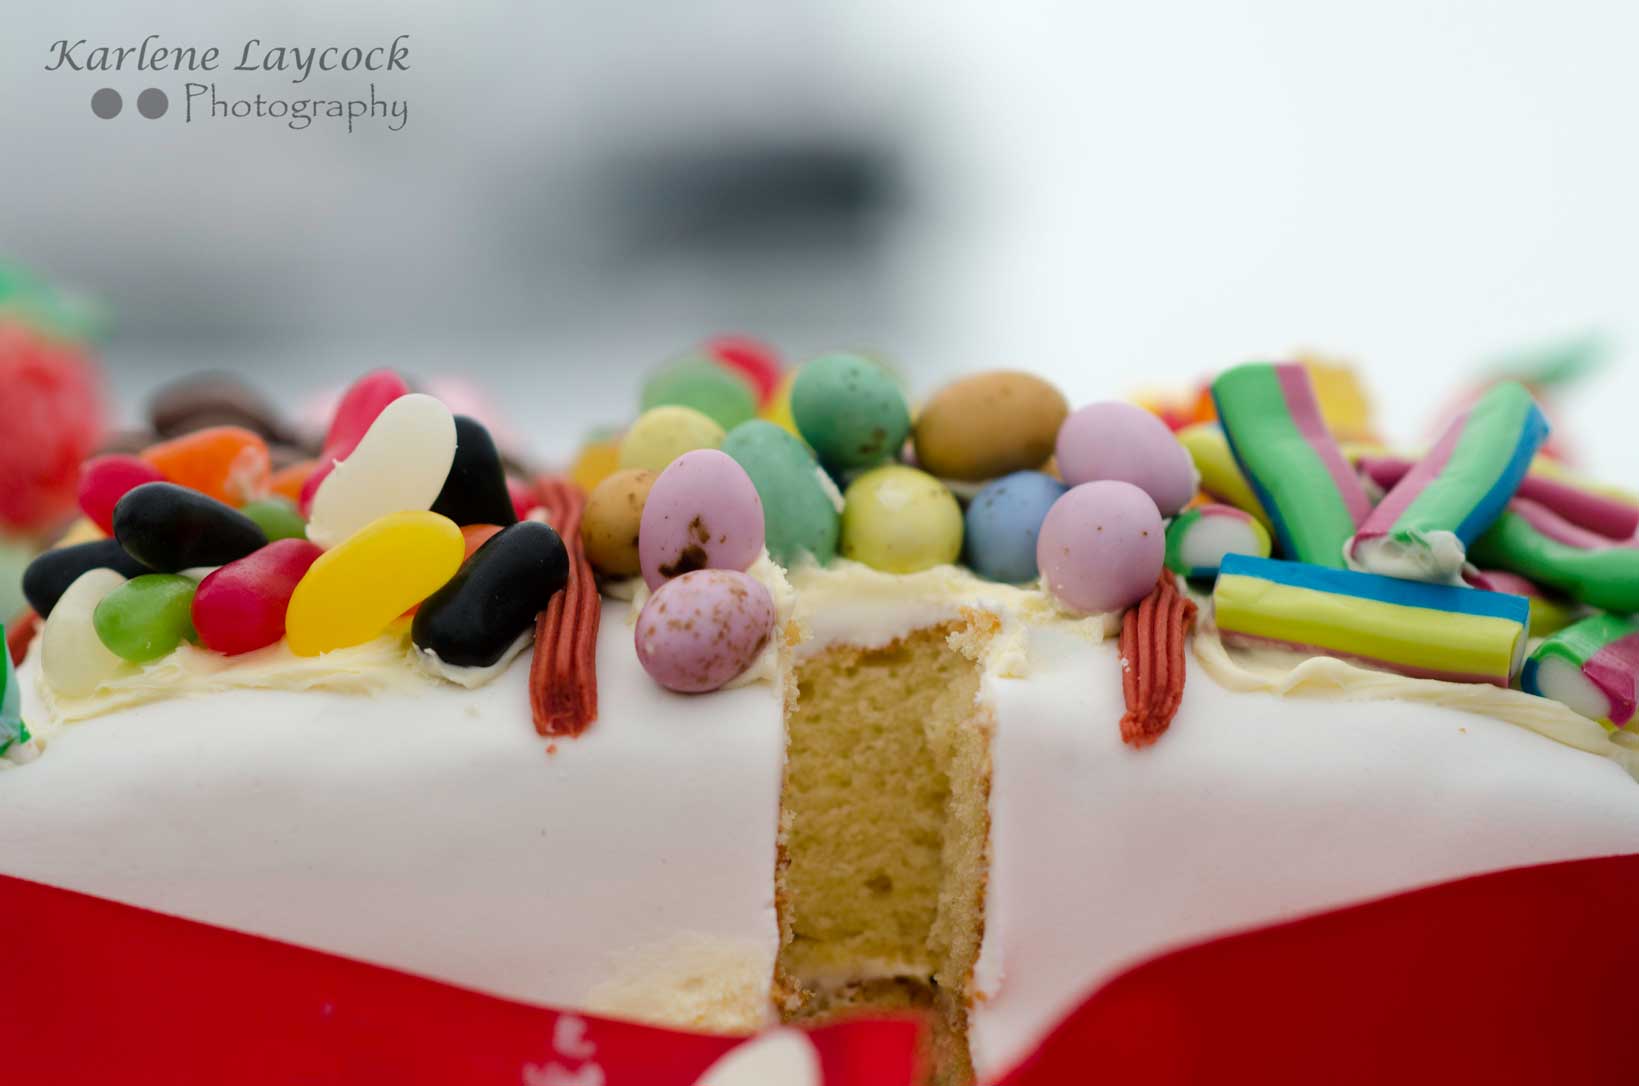 Photograph of a Candy Shop Celebration Cake taken at a Local Bake Off Competion